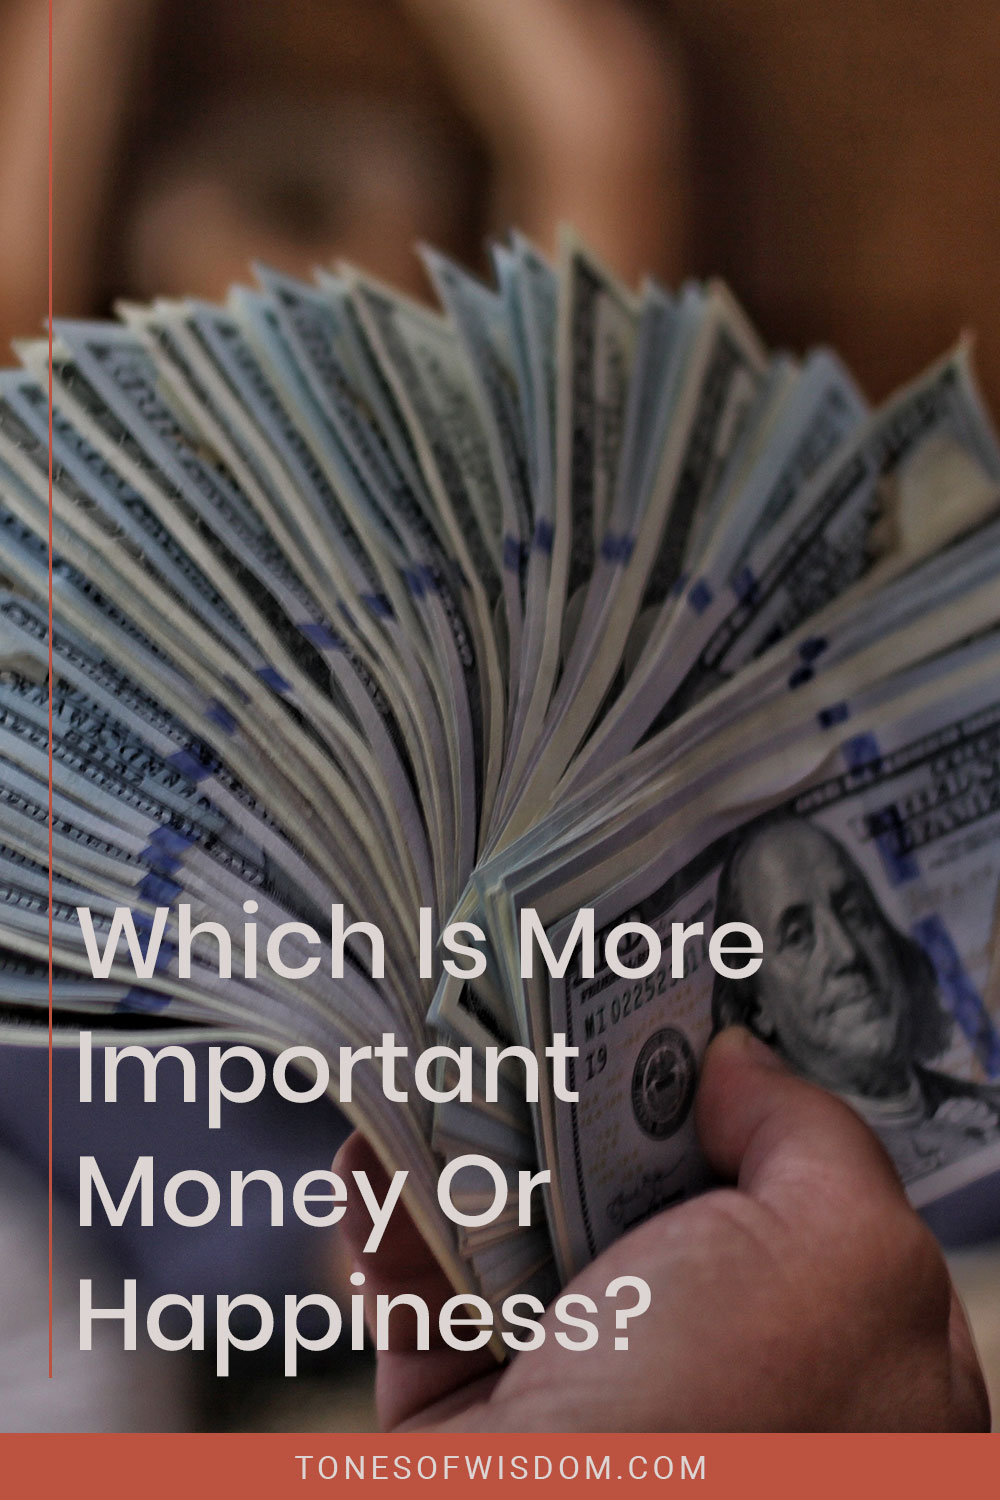 Dollar bills in a hand - Which Is More Important Money Or Happiness?